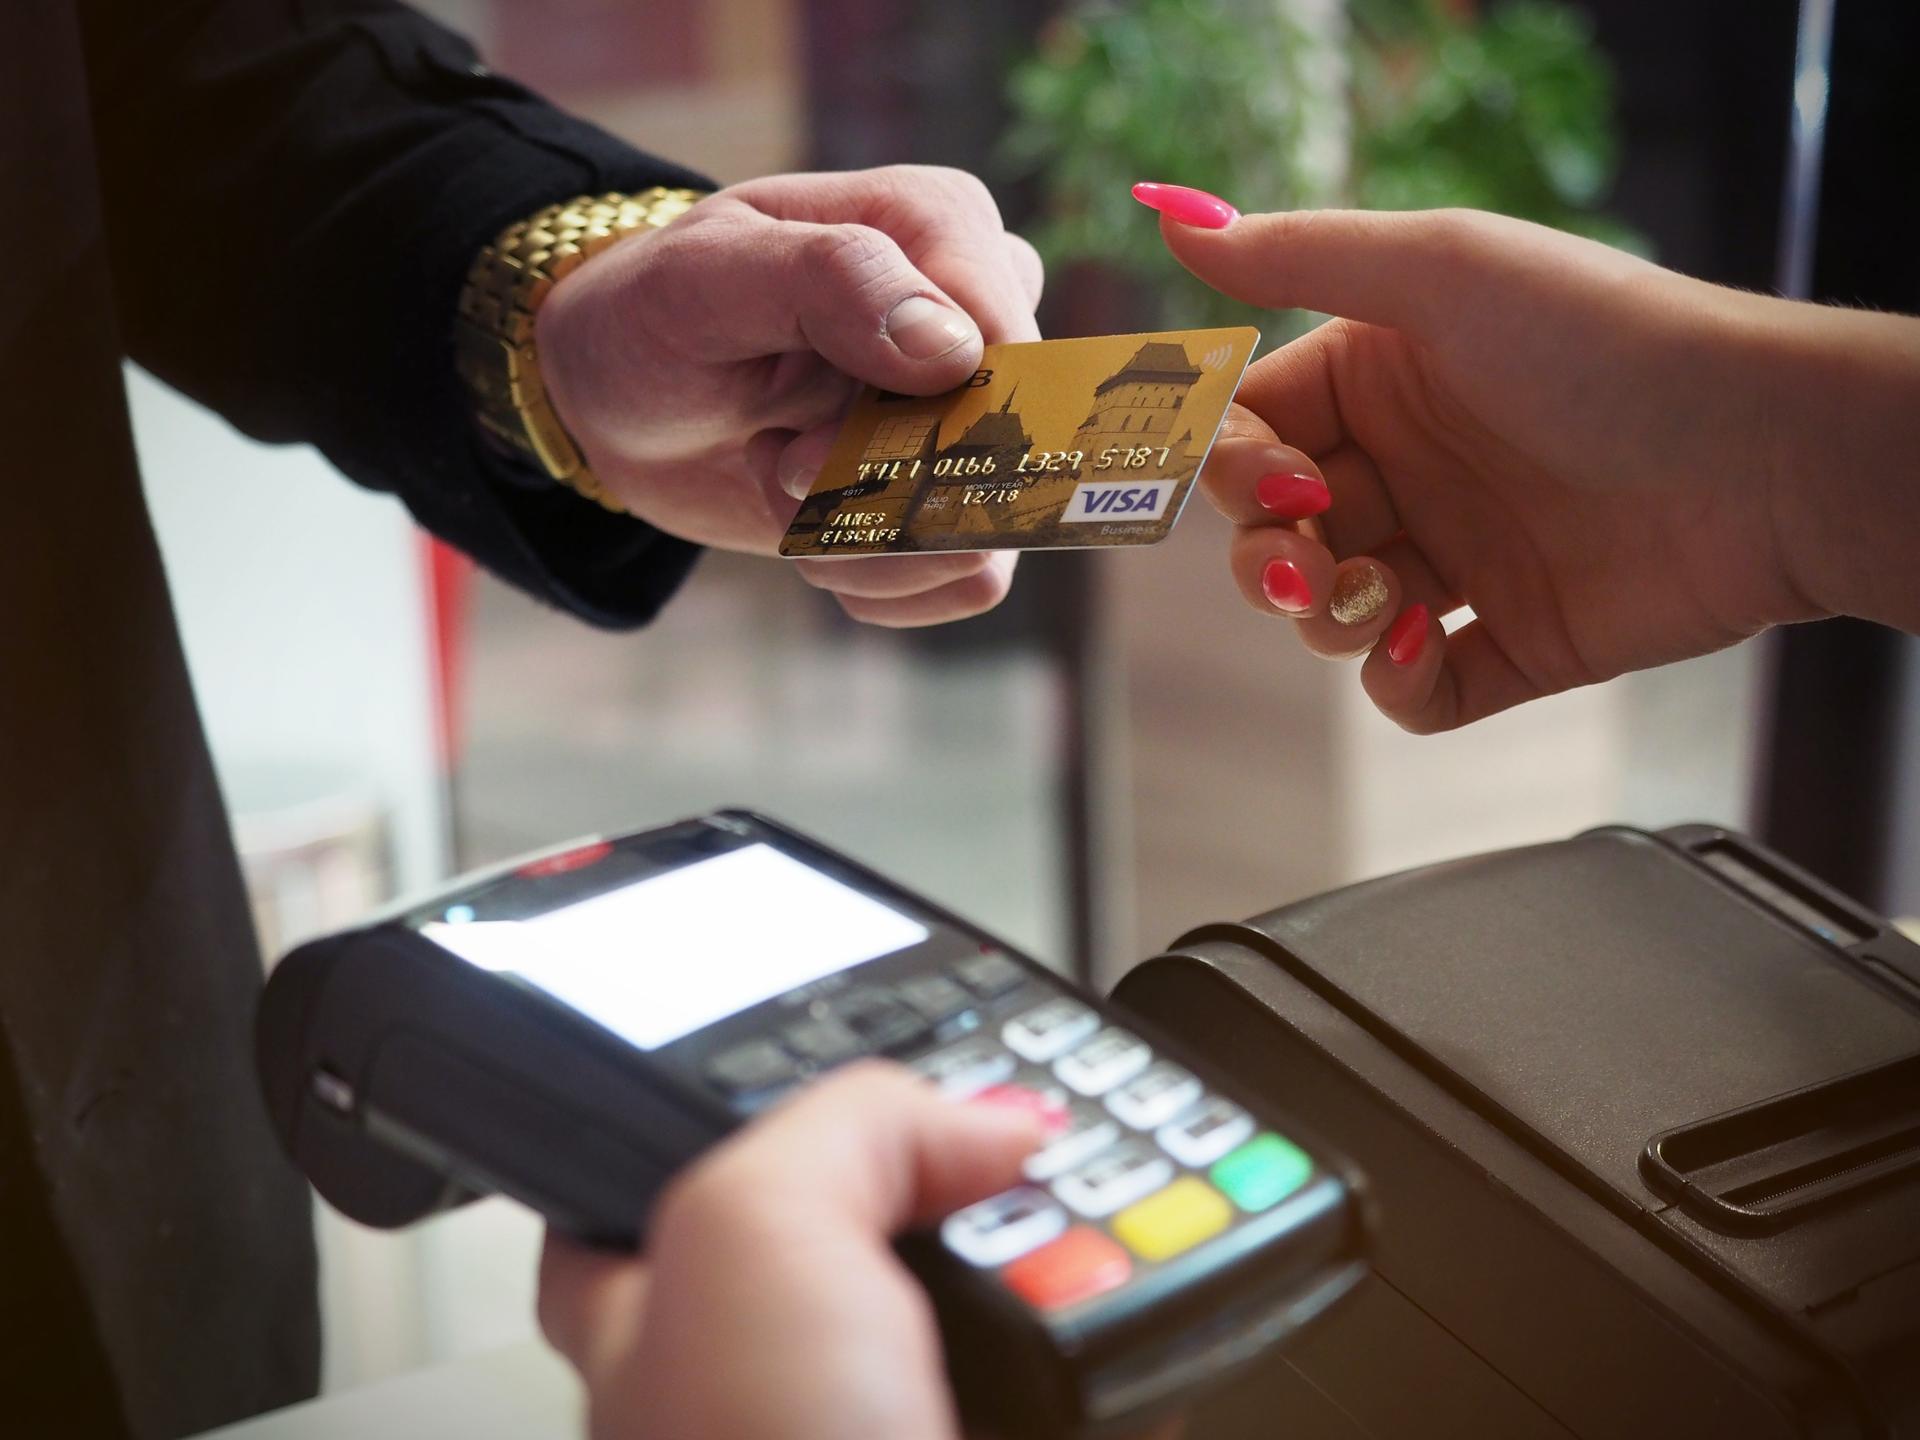 You hear this question all the time in the store.  Check out why it’s important to have confirmation of card payments